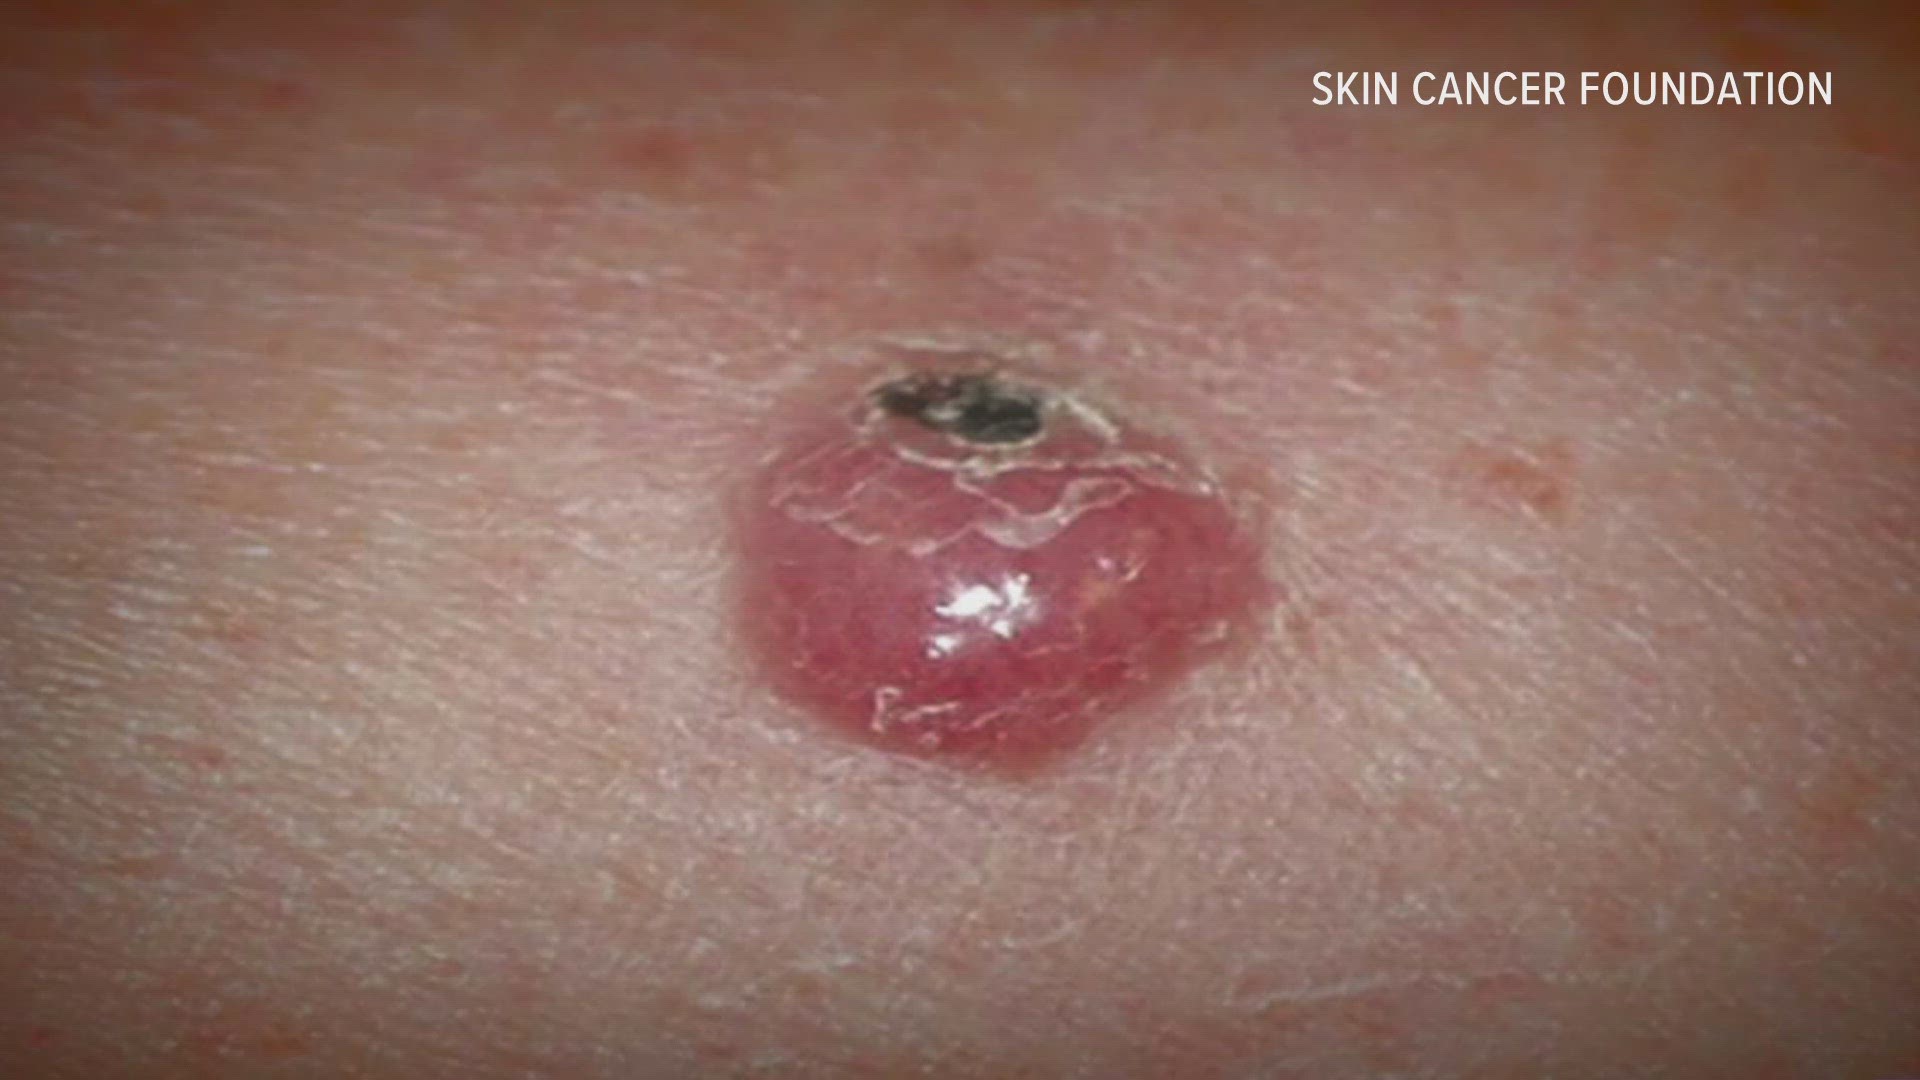 Many people have never heard of Merkel cell carcinoma, the rare form of skin cancer that took the life of Jimmy Buffet, but Al Copeland, Jr. is very familiar with it